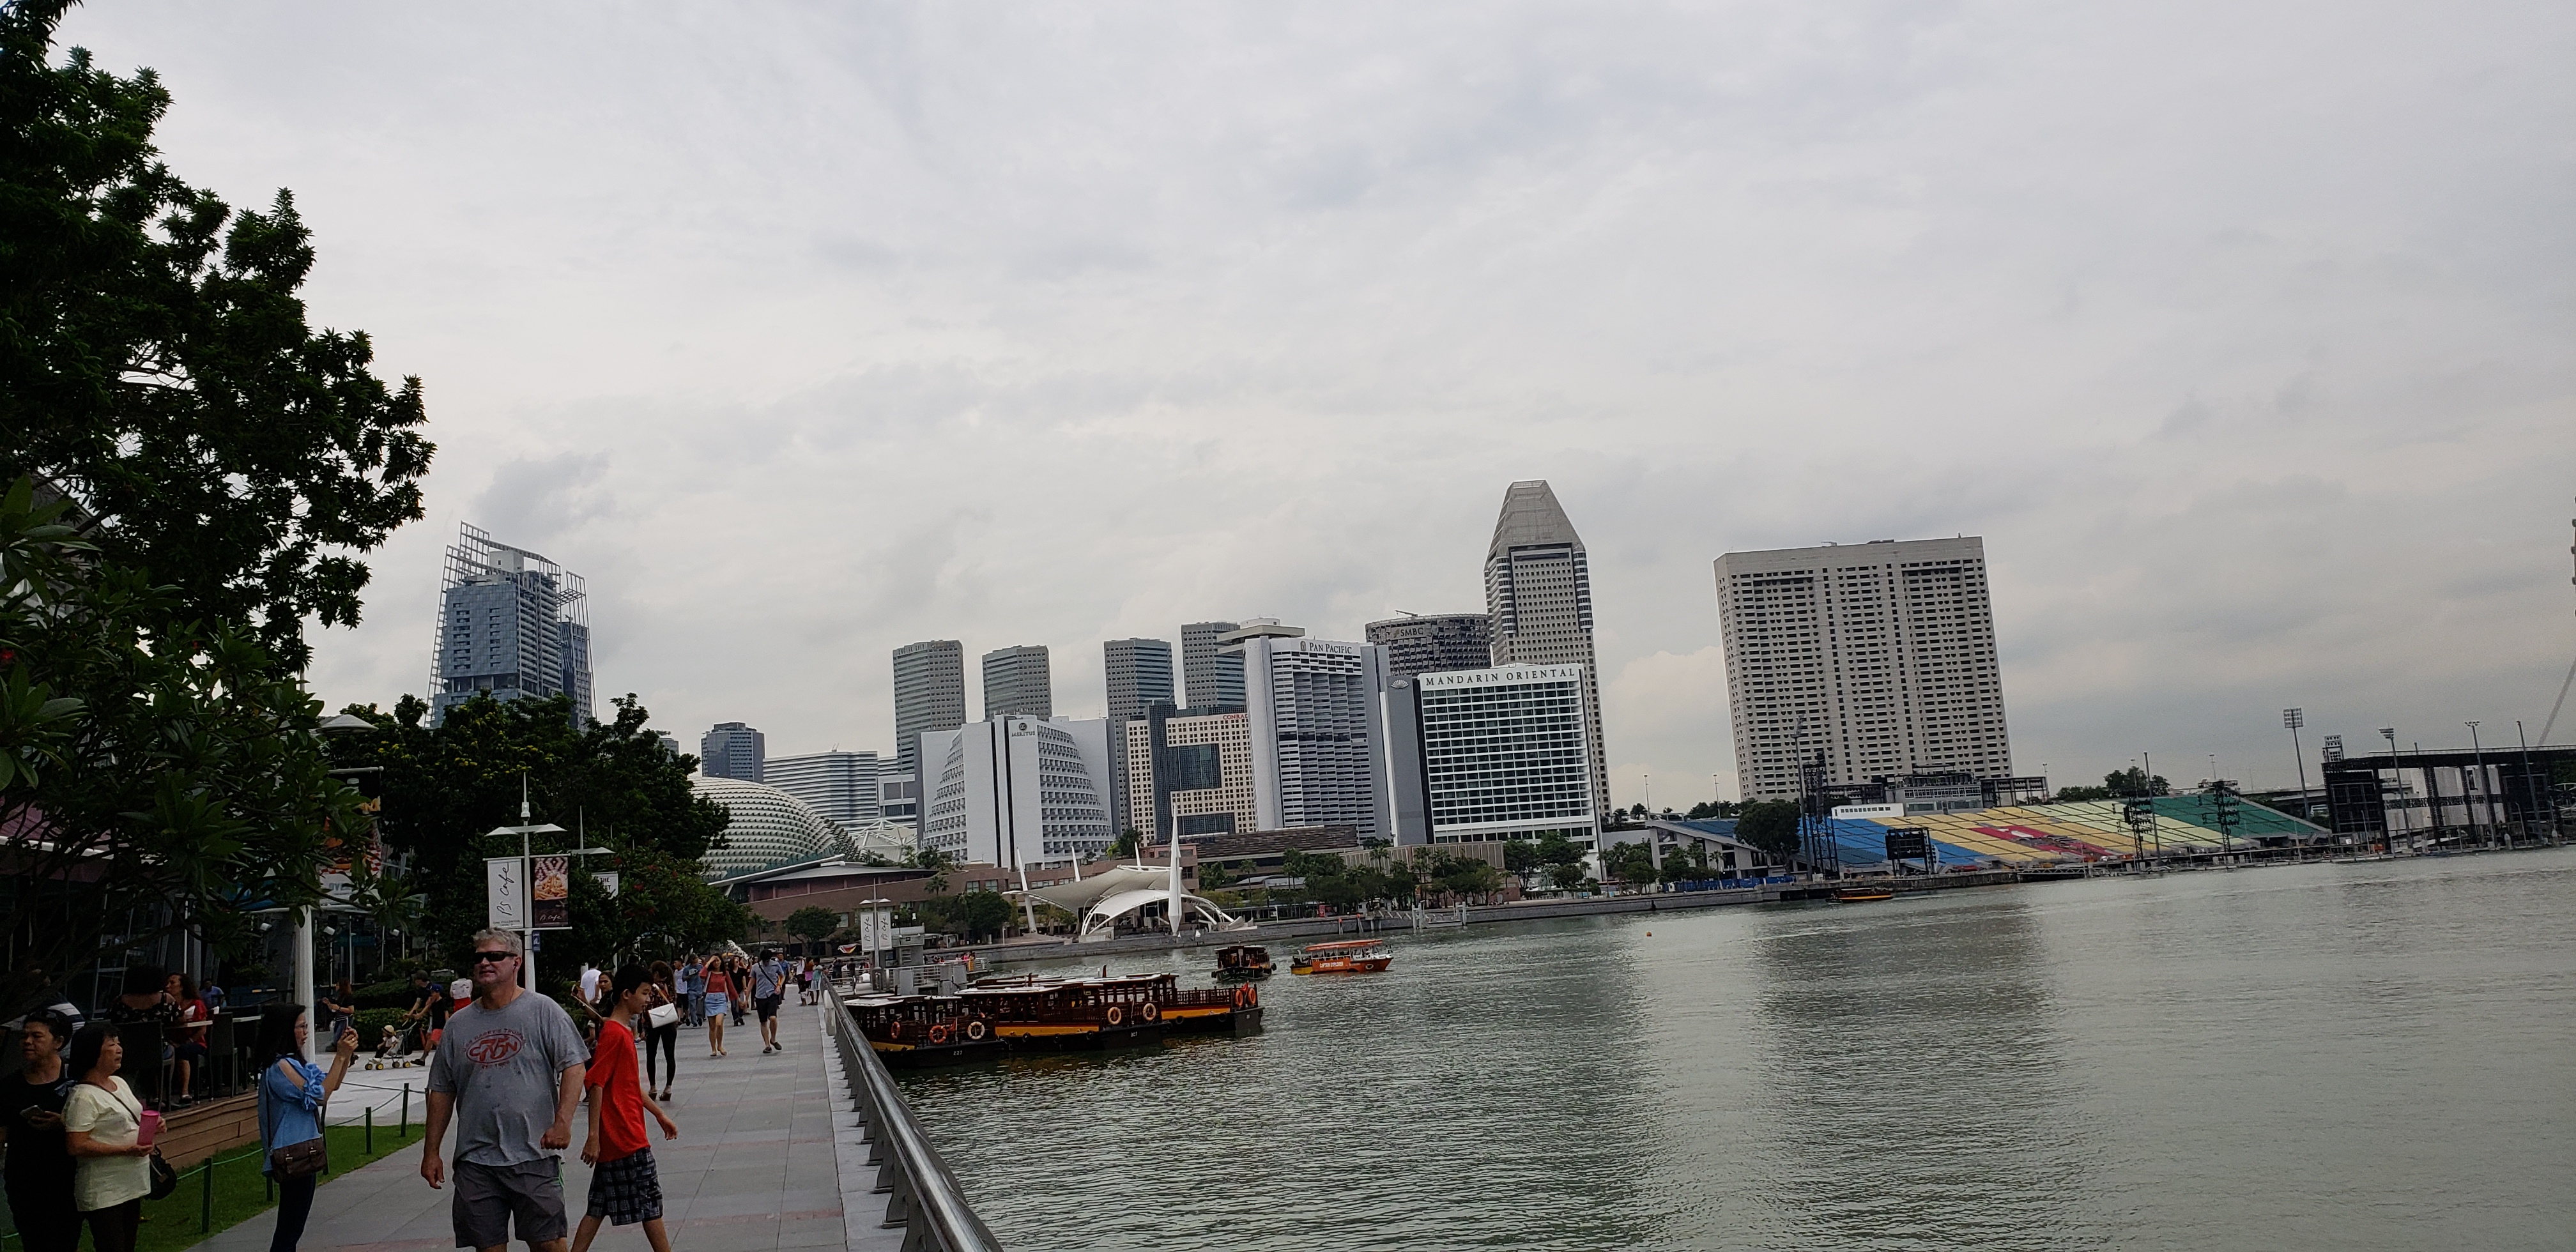 2018 Southeast Asia Trip Day 3 - Singapore (Newton Circus Hawker Food Chilli Crab, Little India, Tekka Centre, Merlion, Esplanade Bridge, Helix Bridge, Marina Bay, Gardens By The Bay, Cloud Forest, Supertree Grove, OCBC Skyway, Swimming on Roof)